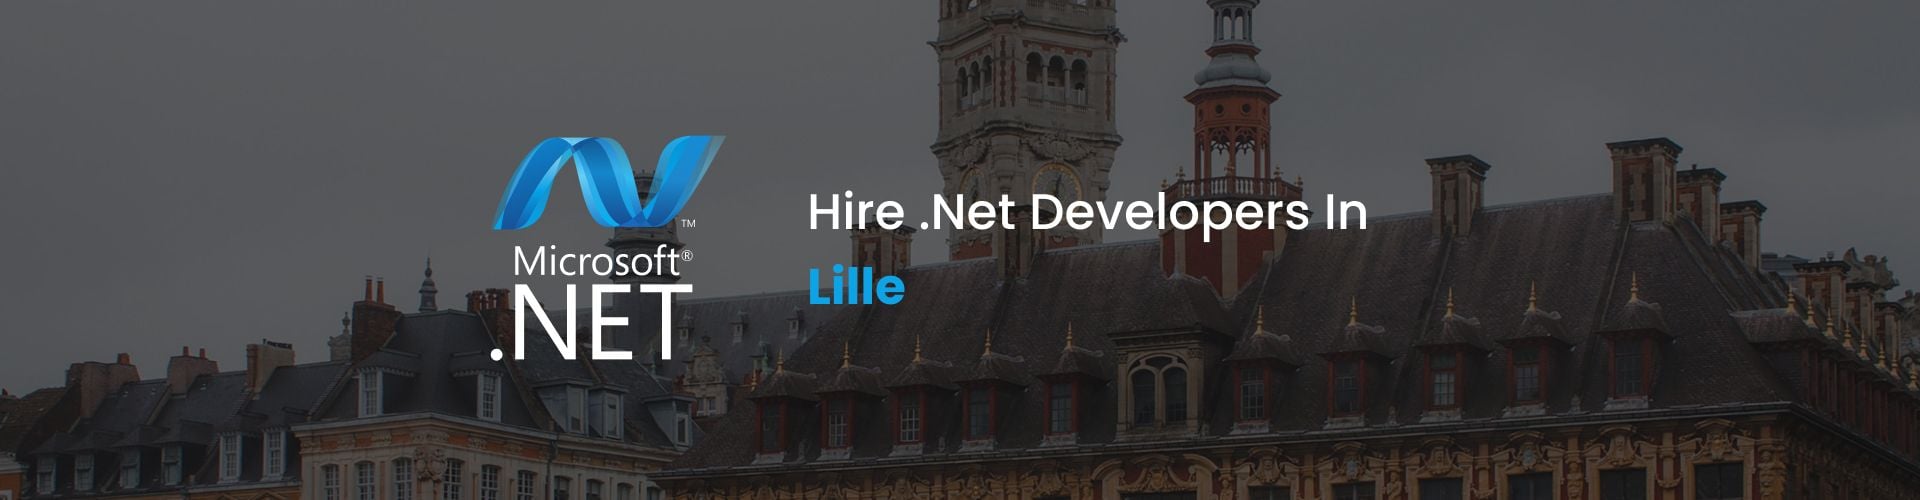 hire .net developers in lille